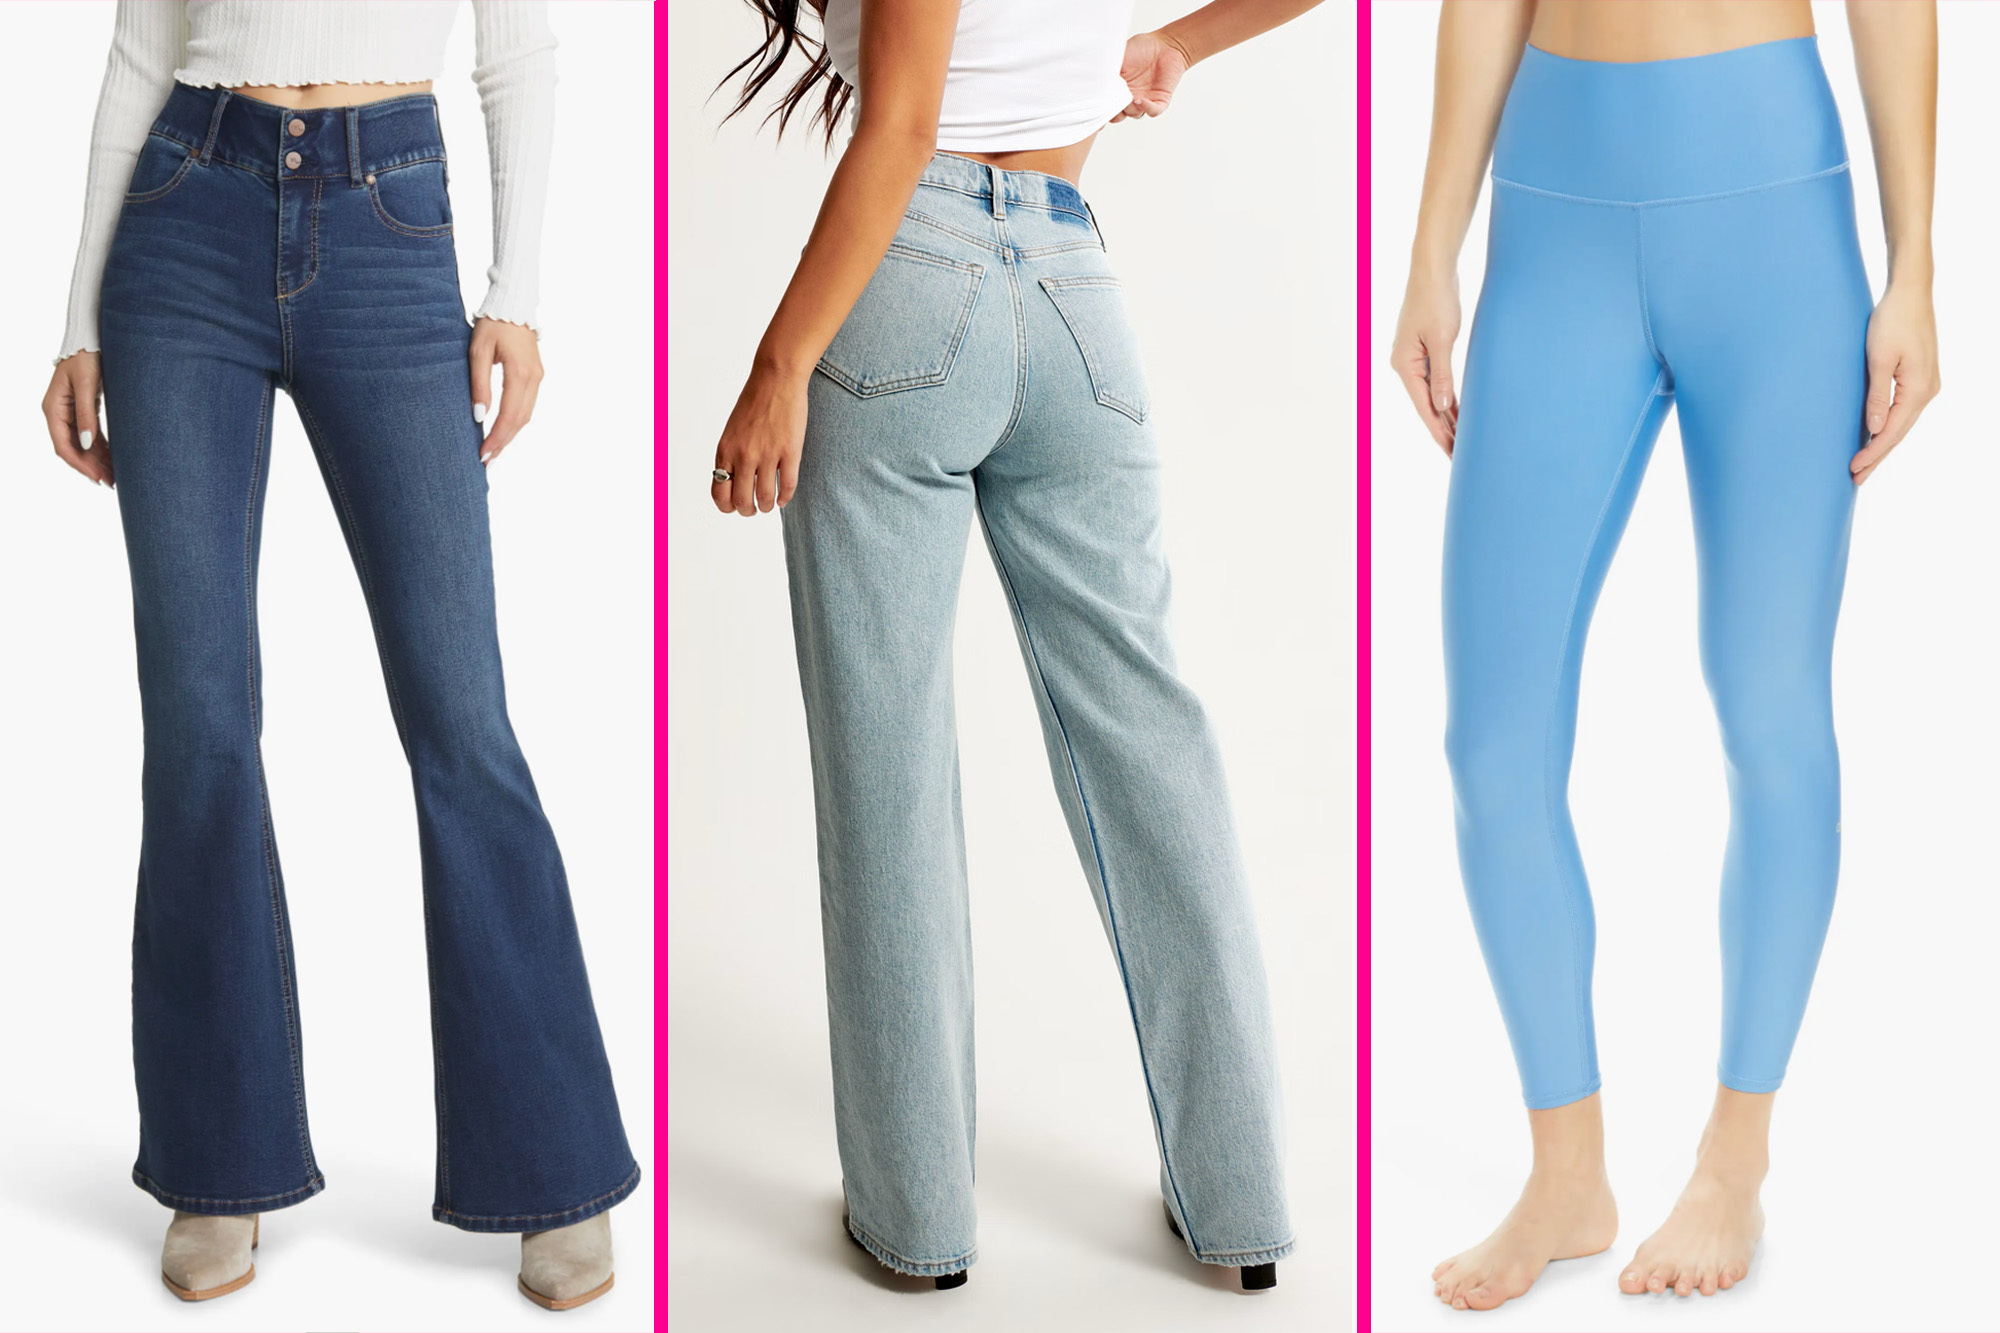 Good Luck Choosing Real Pants Over These Chic Yet Functional Leggings